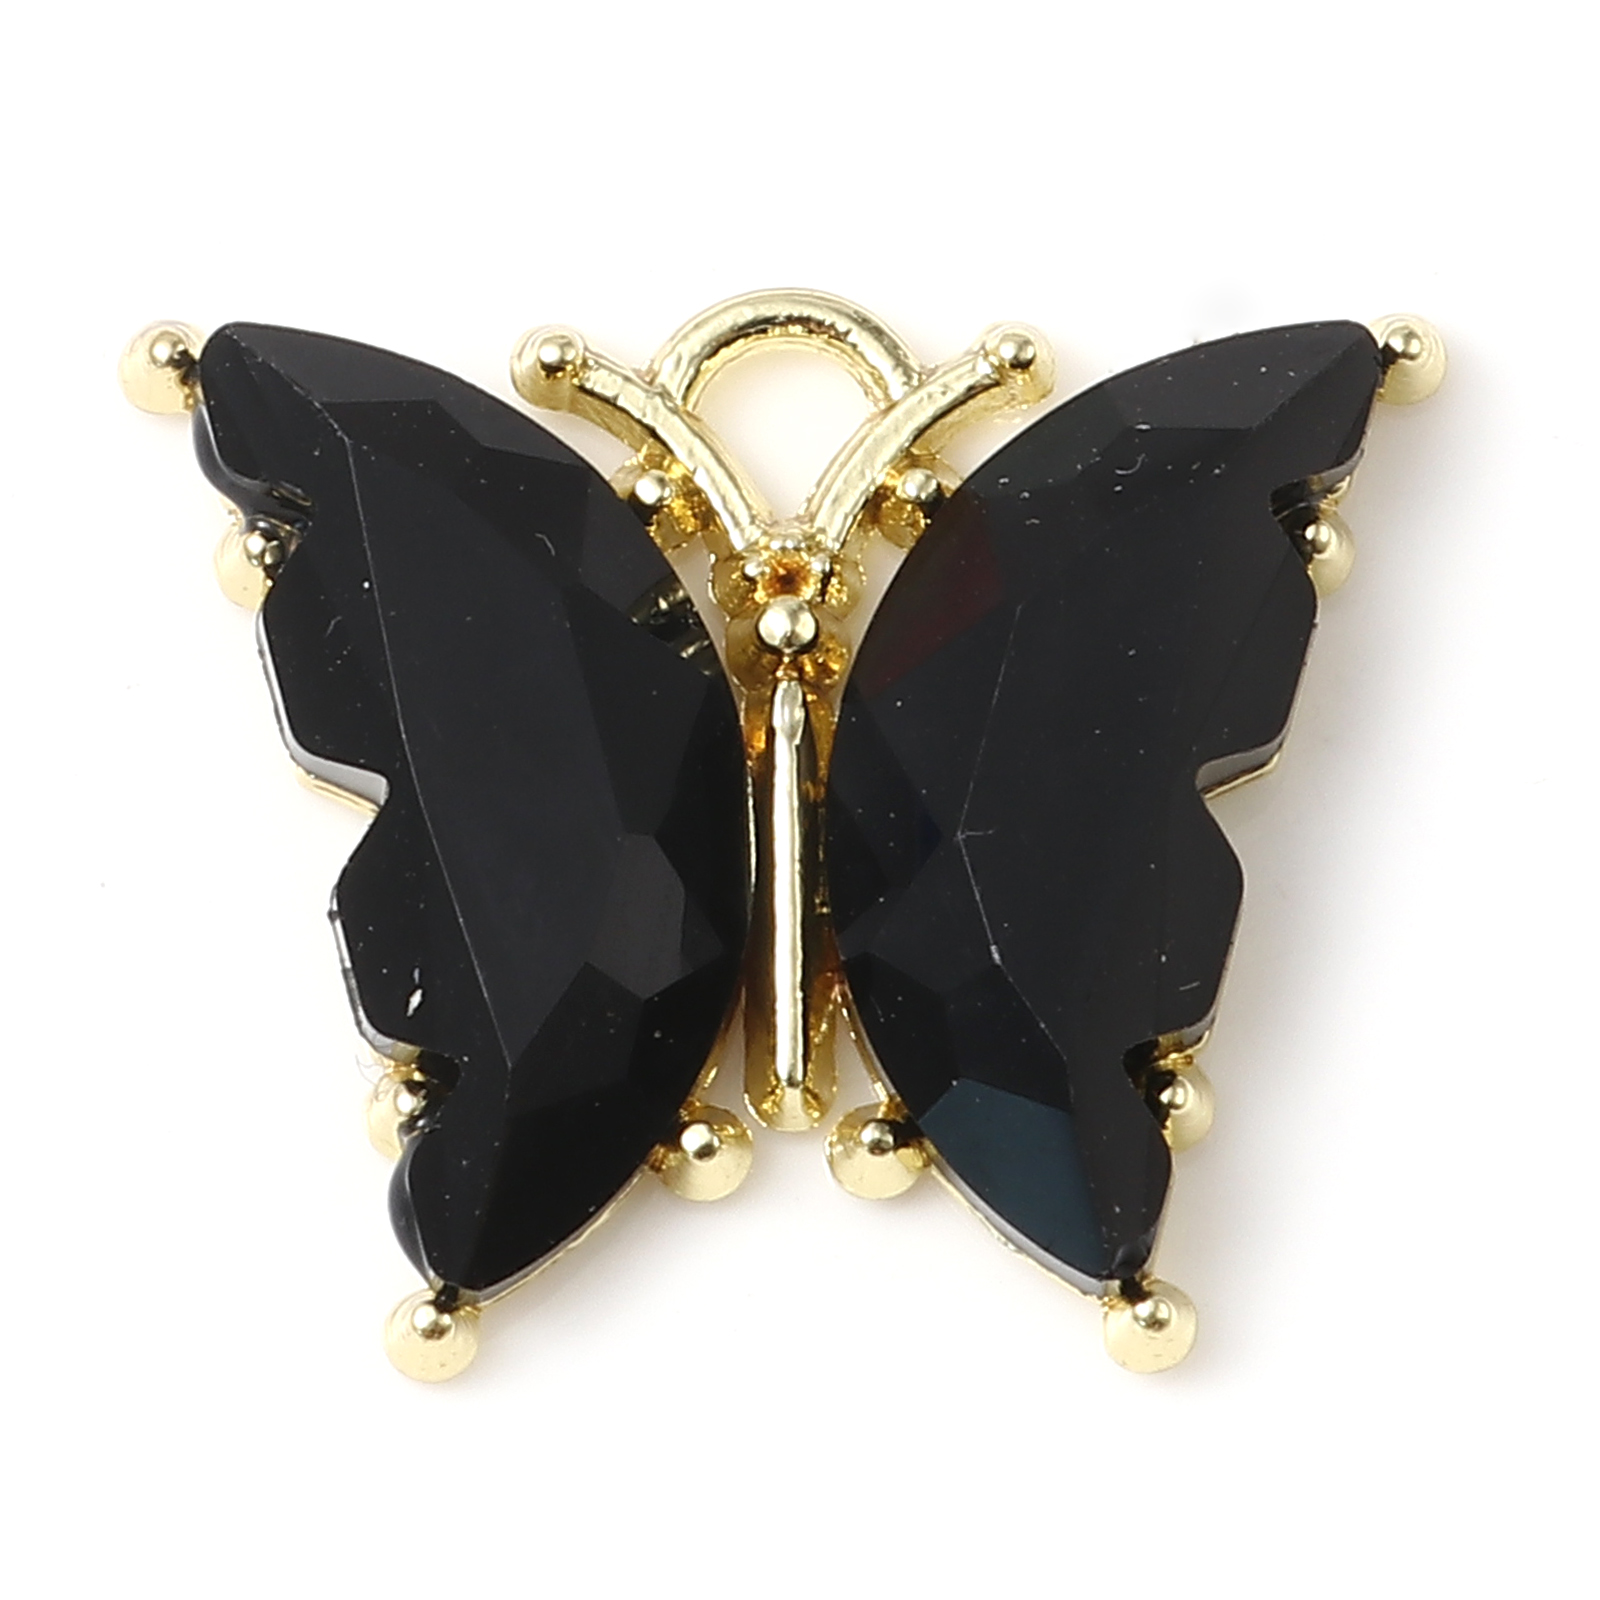 Picture of Zinc Based Alloy & Resin Insect Charms Butterfly Animal Gold Plated Black 23mm x 19mm - 22mm x 19mm, 10 PCs